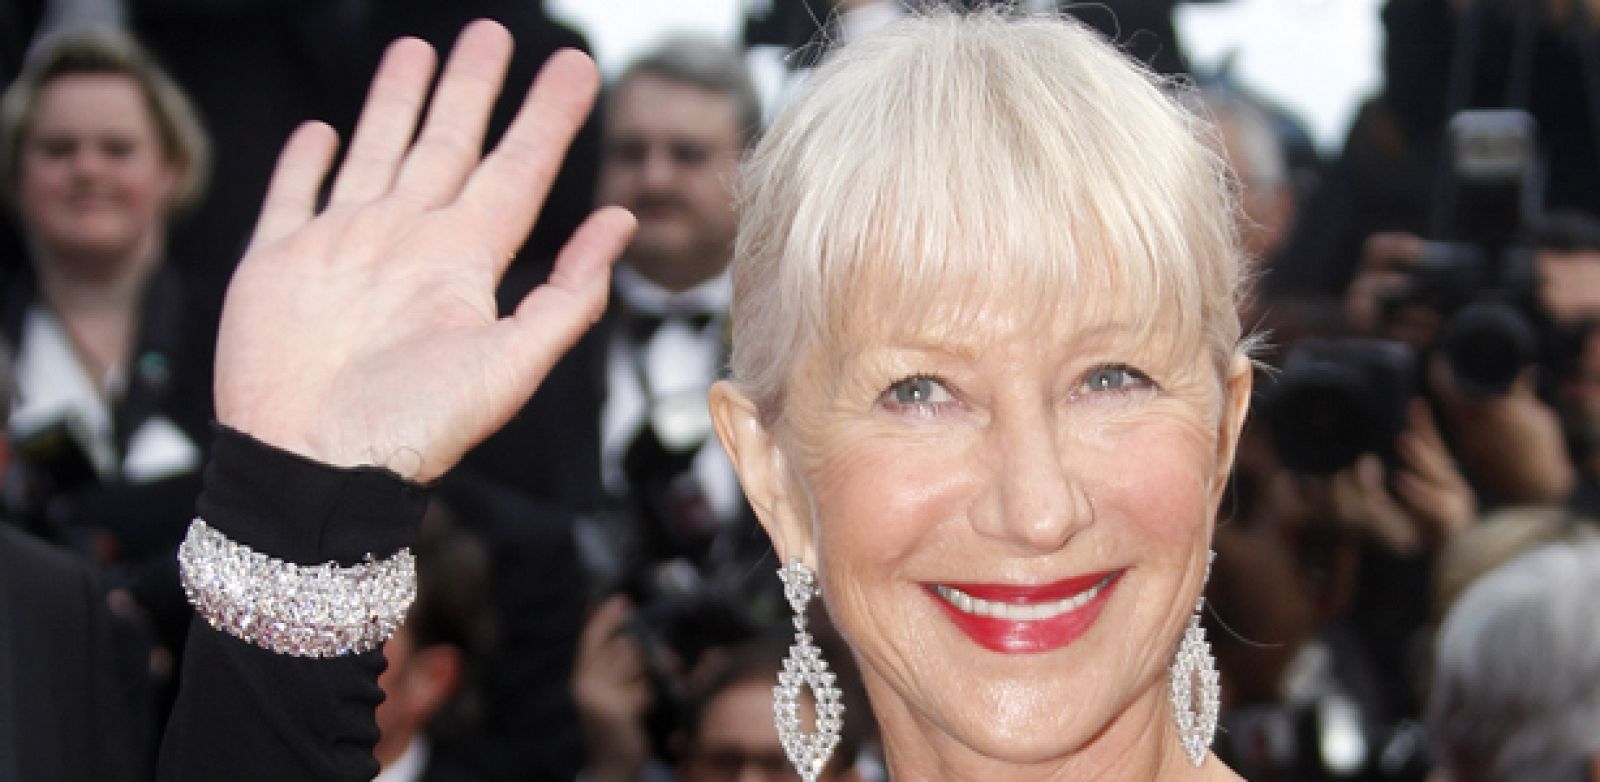 Actress Mirren arrives for the screening of "Robin Hood" and for the opening ceremony of the 63rd Cannes Film Festival